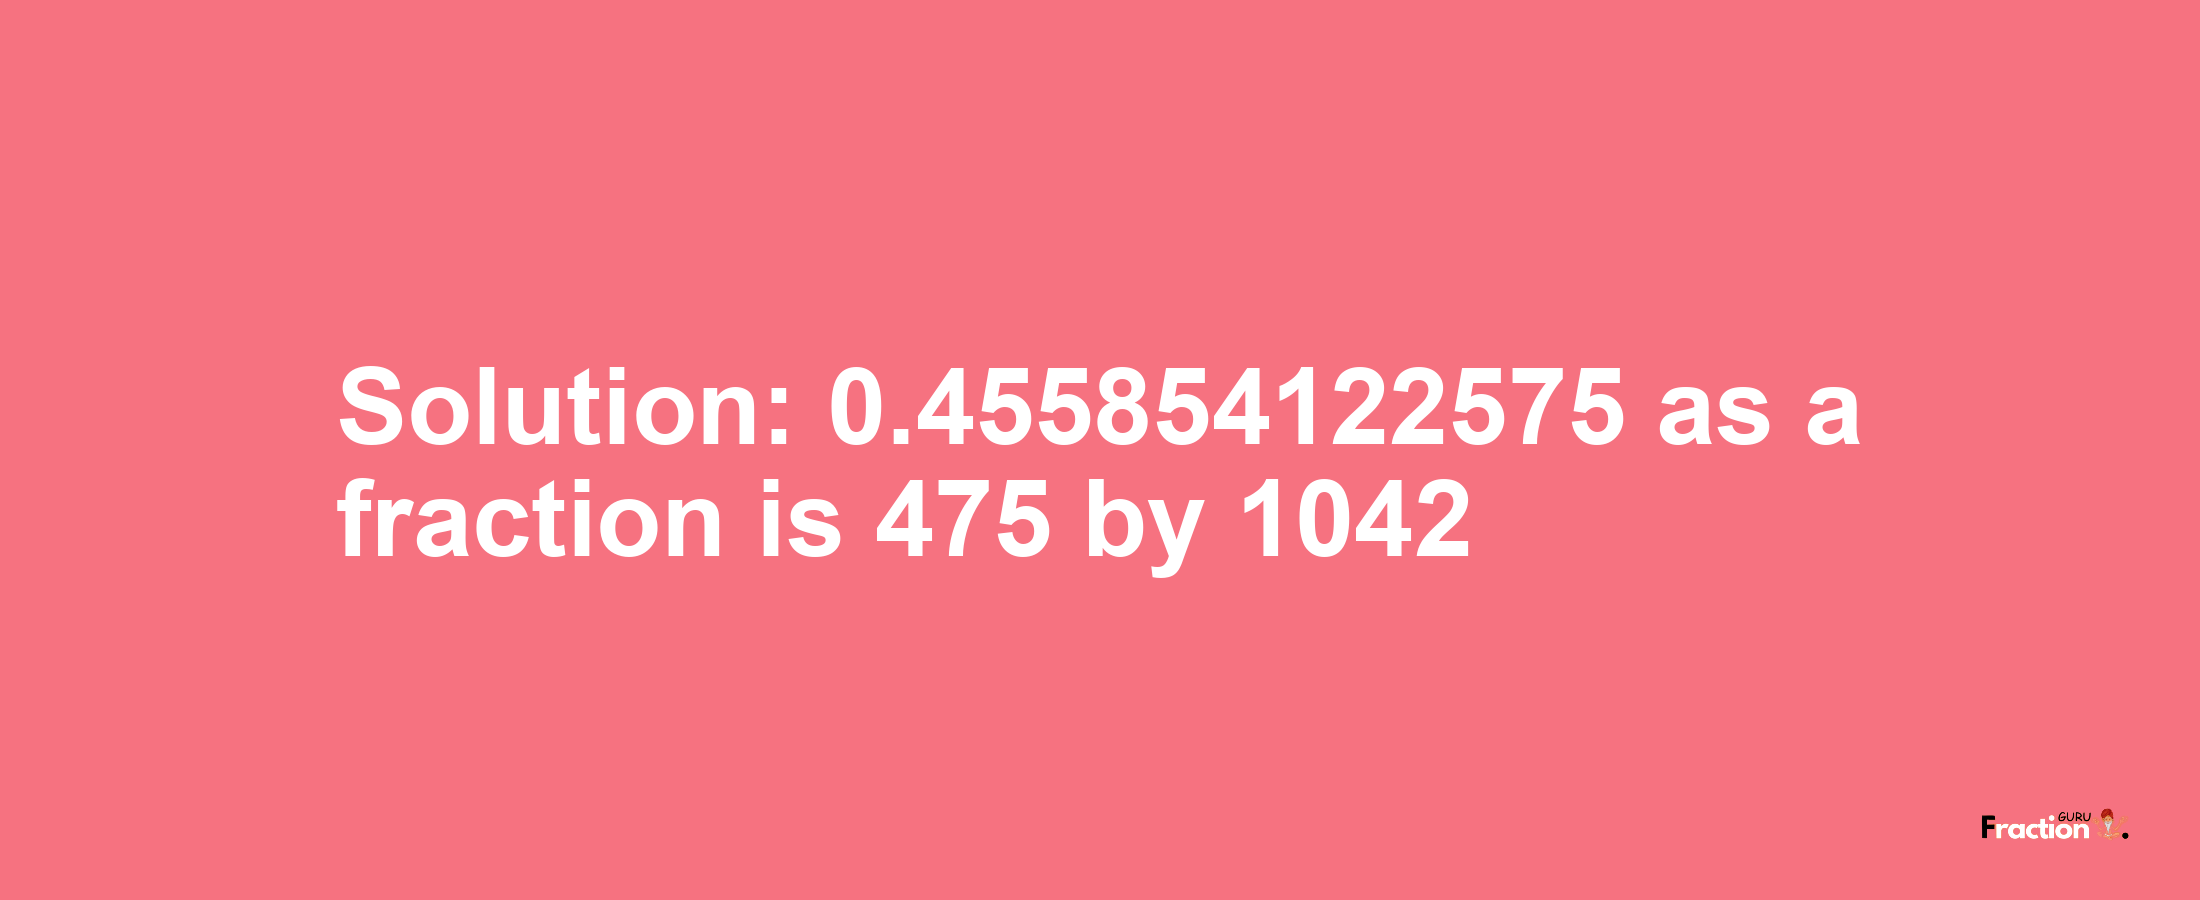 Solution:0.455854122575 as a fraction is 475/1042